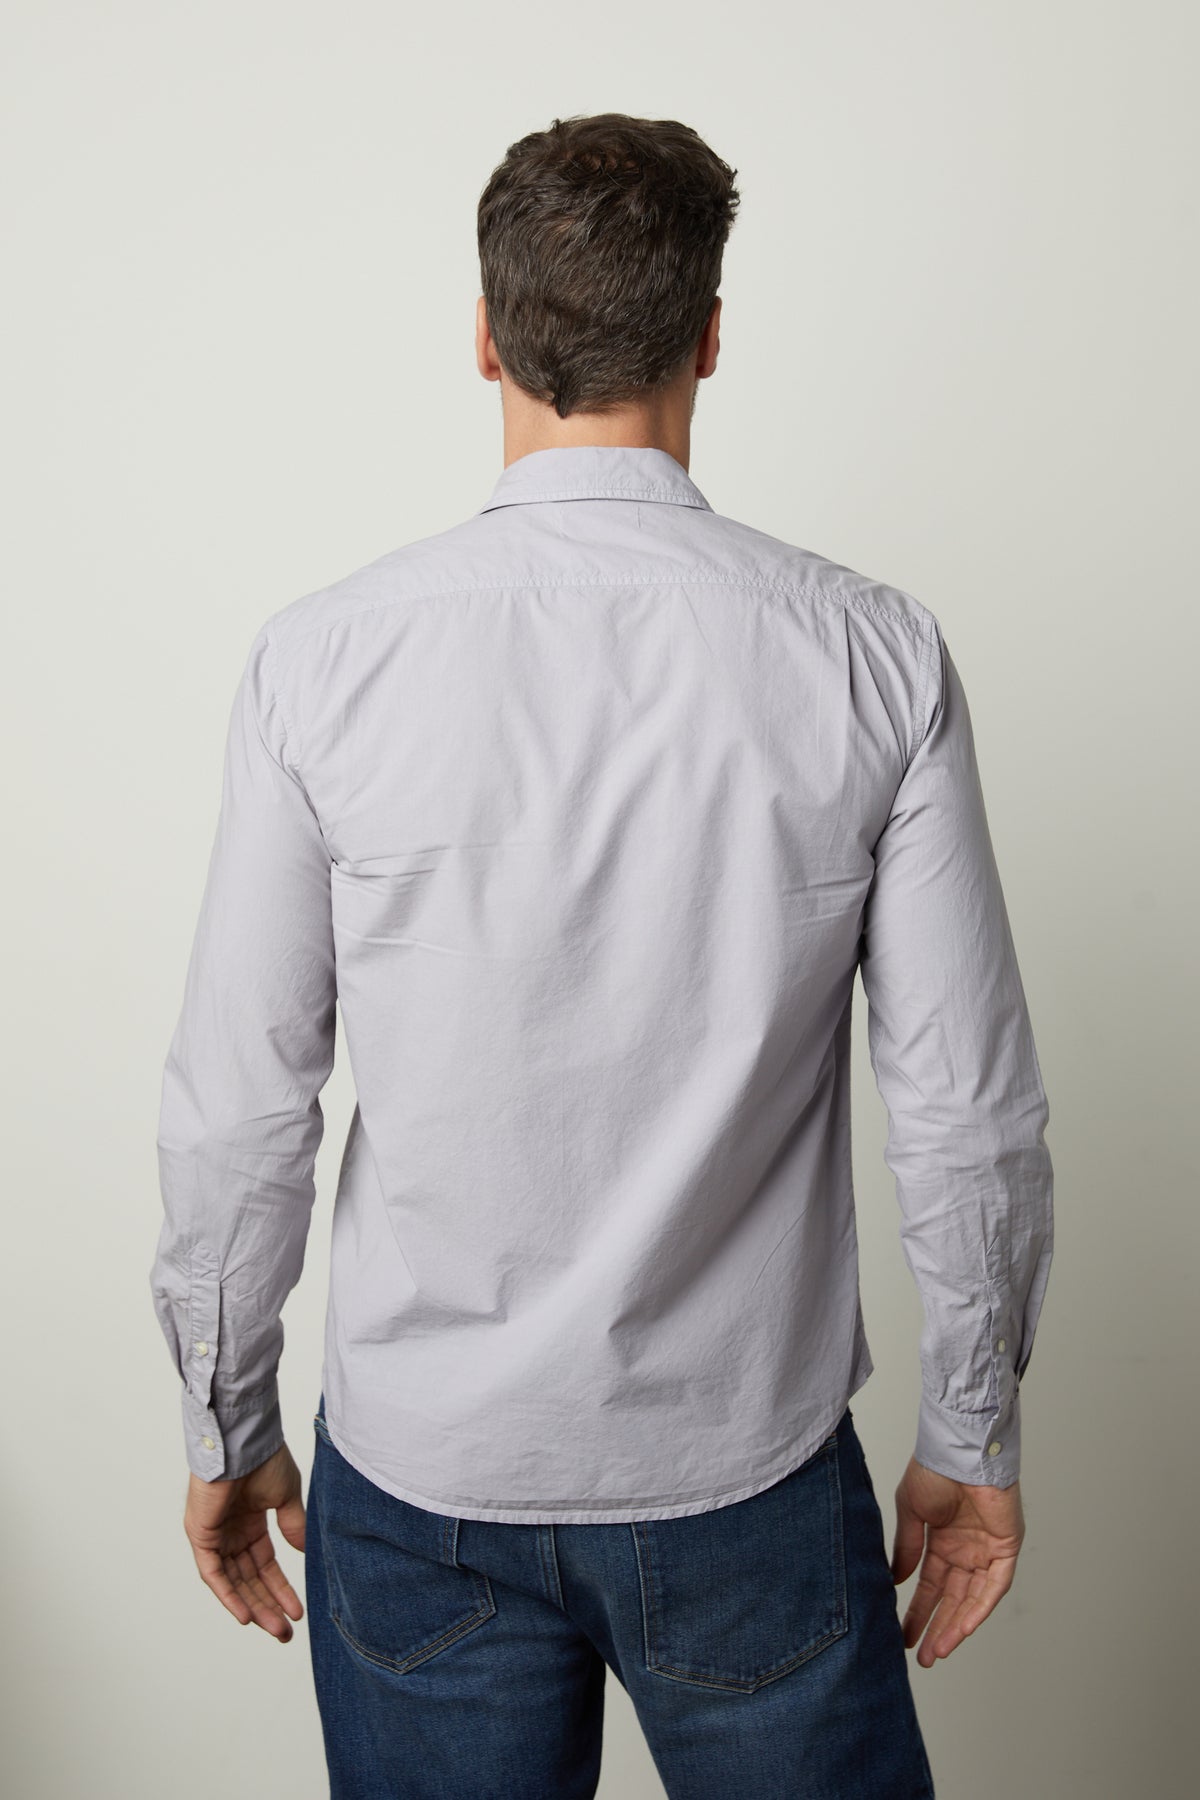 The back view of a man wearing jeans and a Velvet by Graham & Spencer BROOKS BUTTON-UP SHIRT.-35782370066625